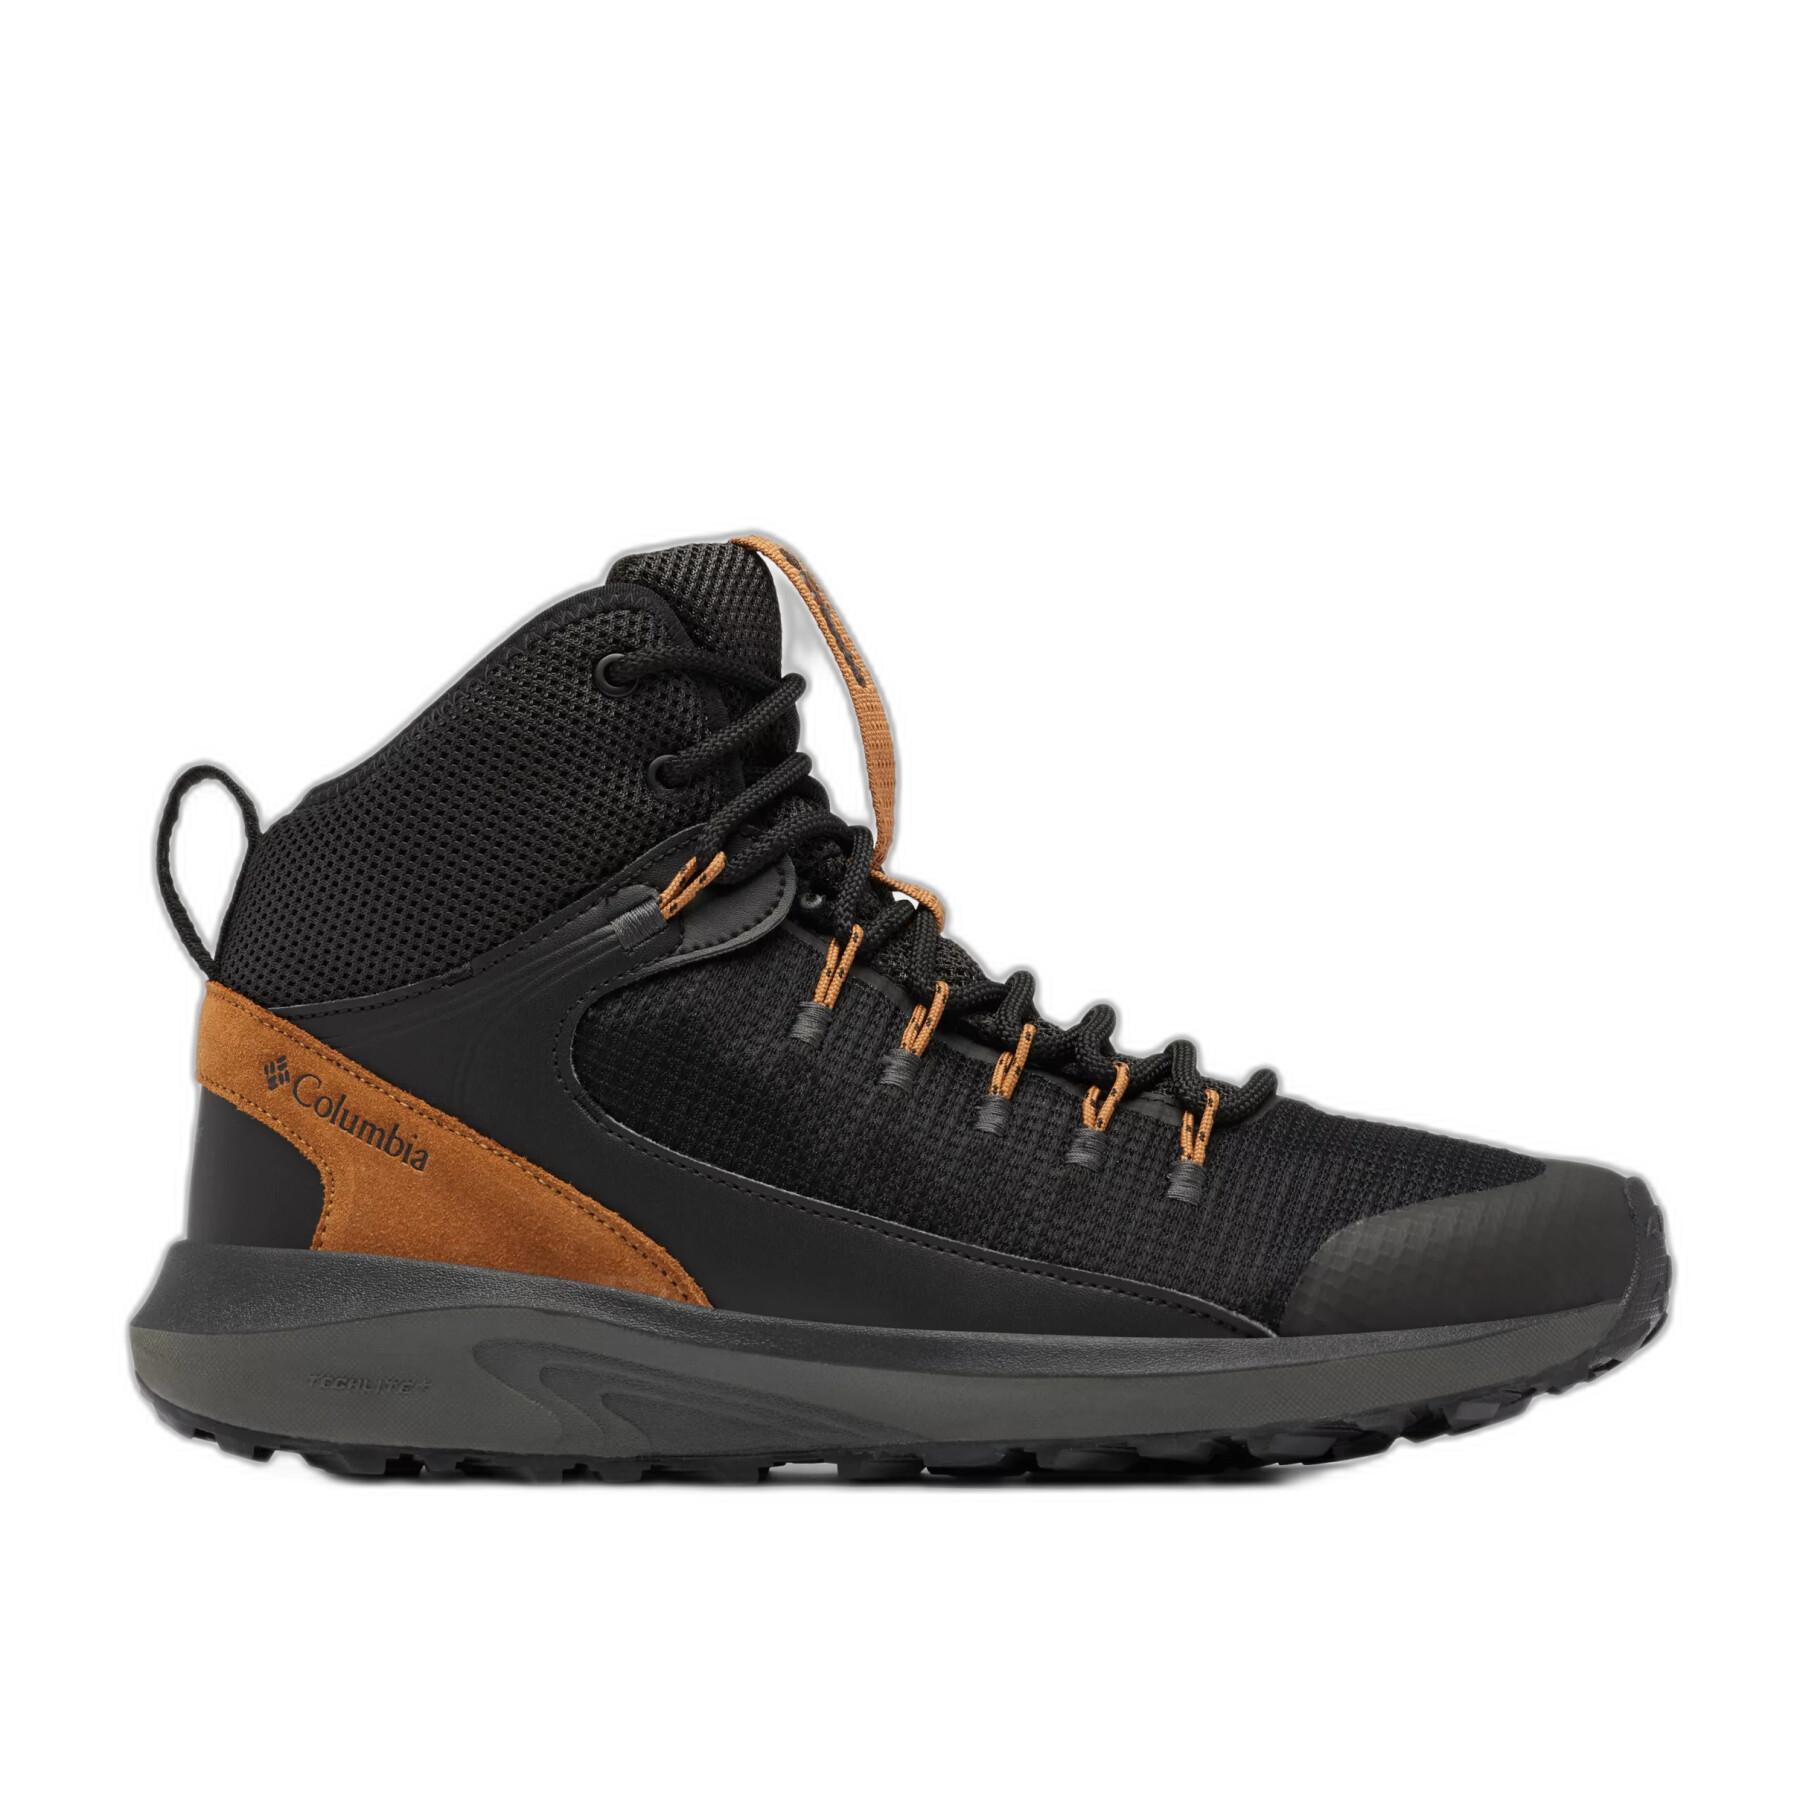 Waterproof hiking shoes Columbia Trailstorm™ Mid